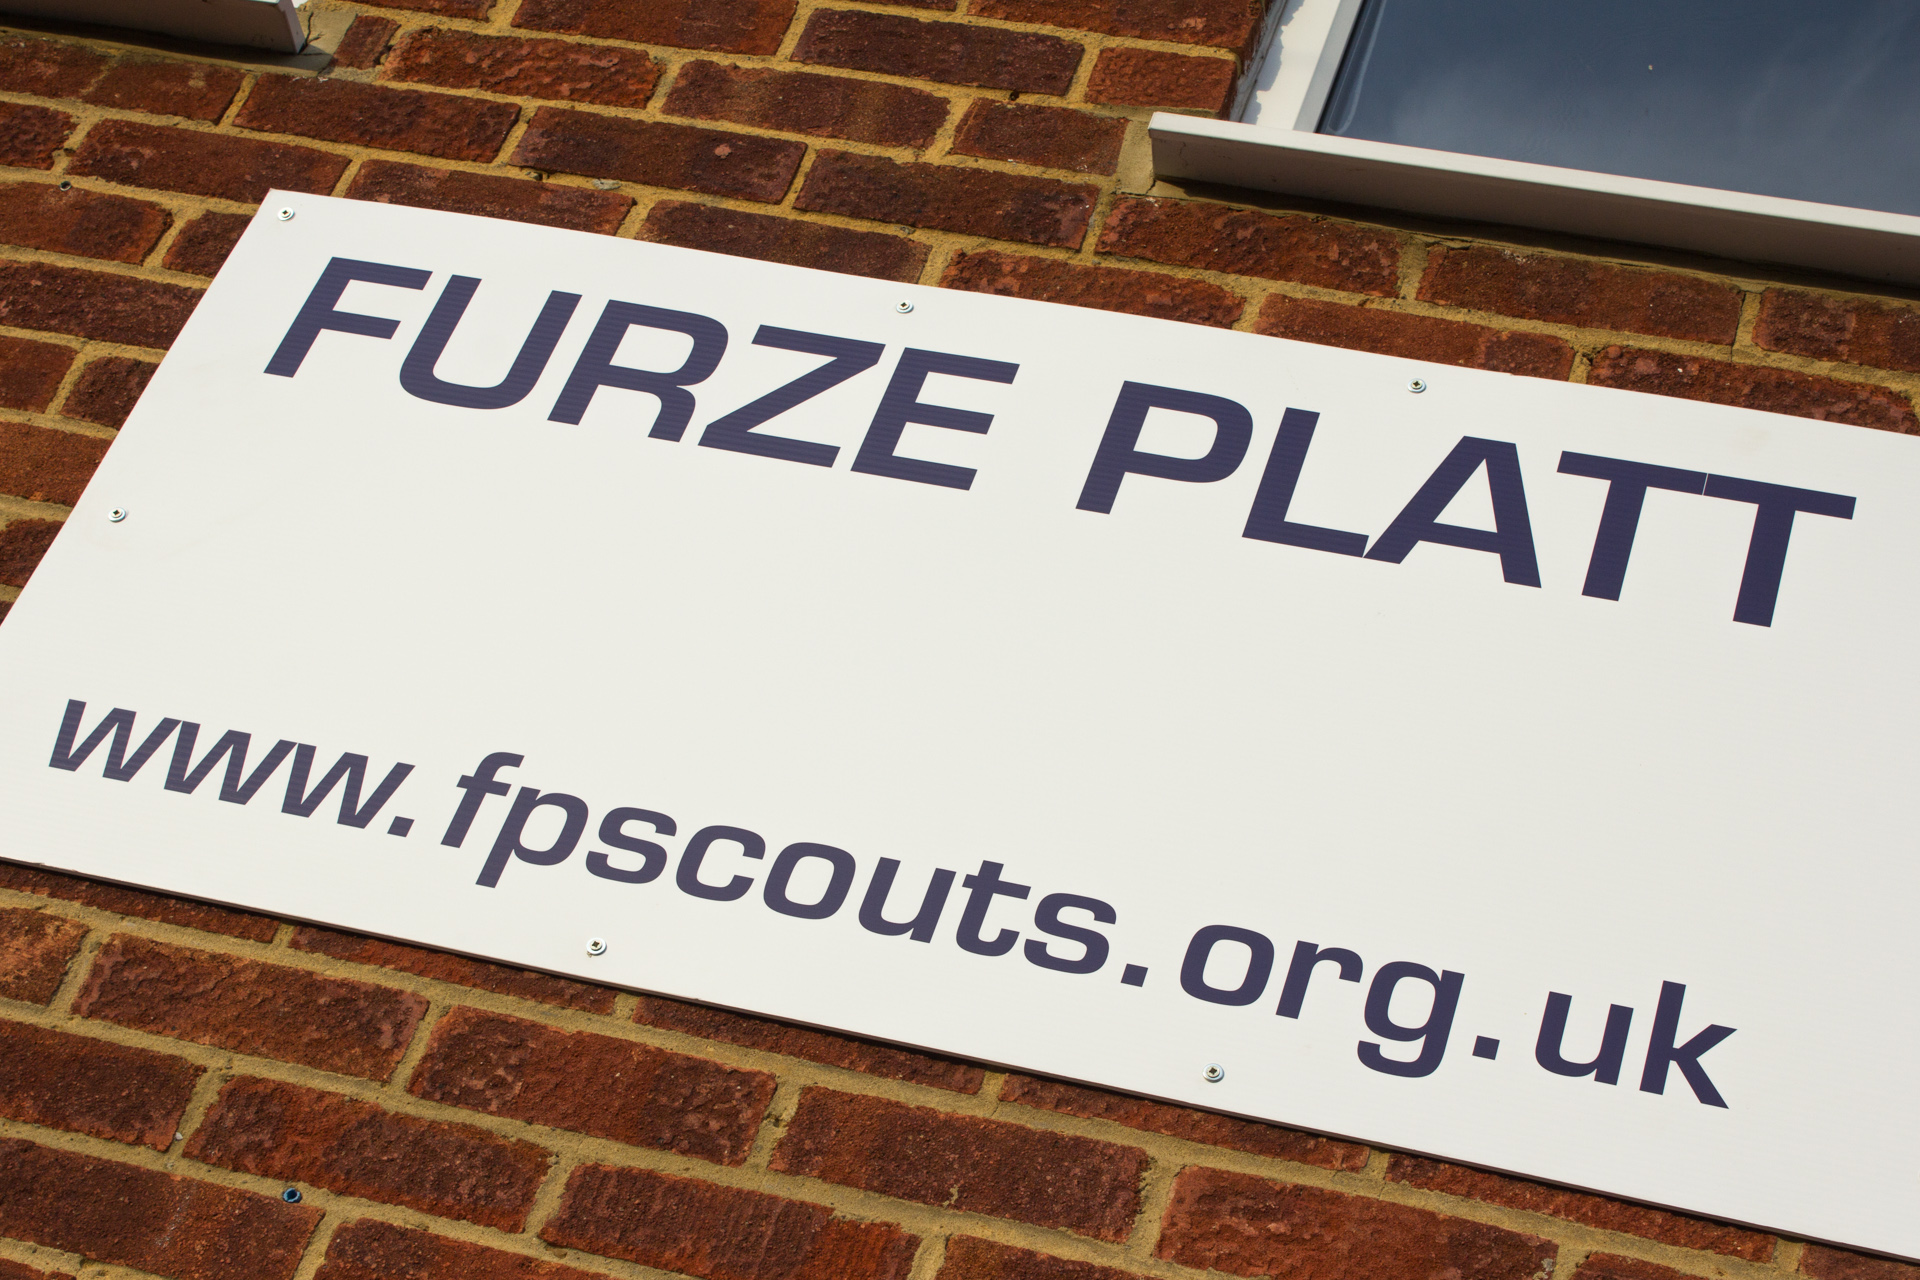 Signage outside the Scout Hut.